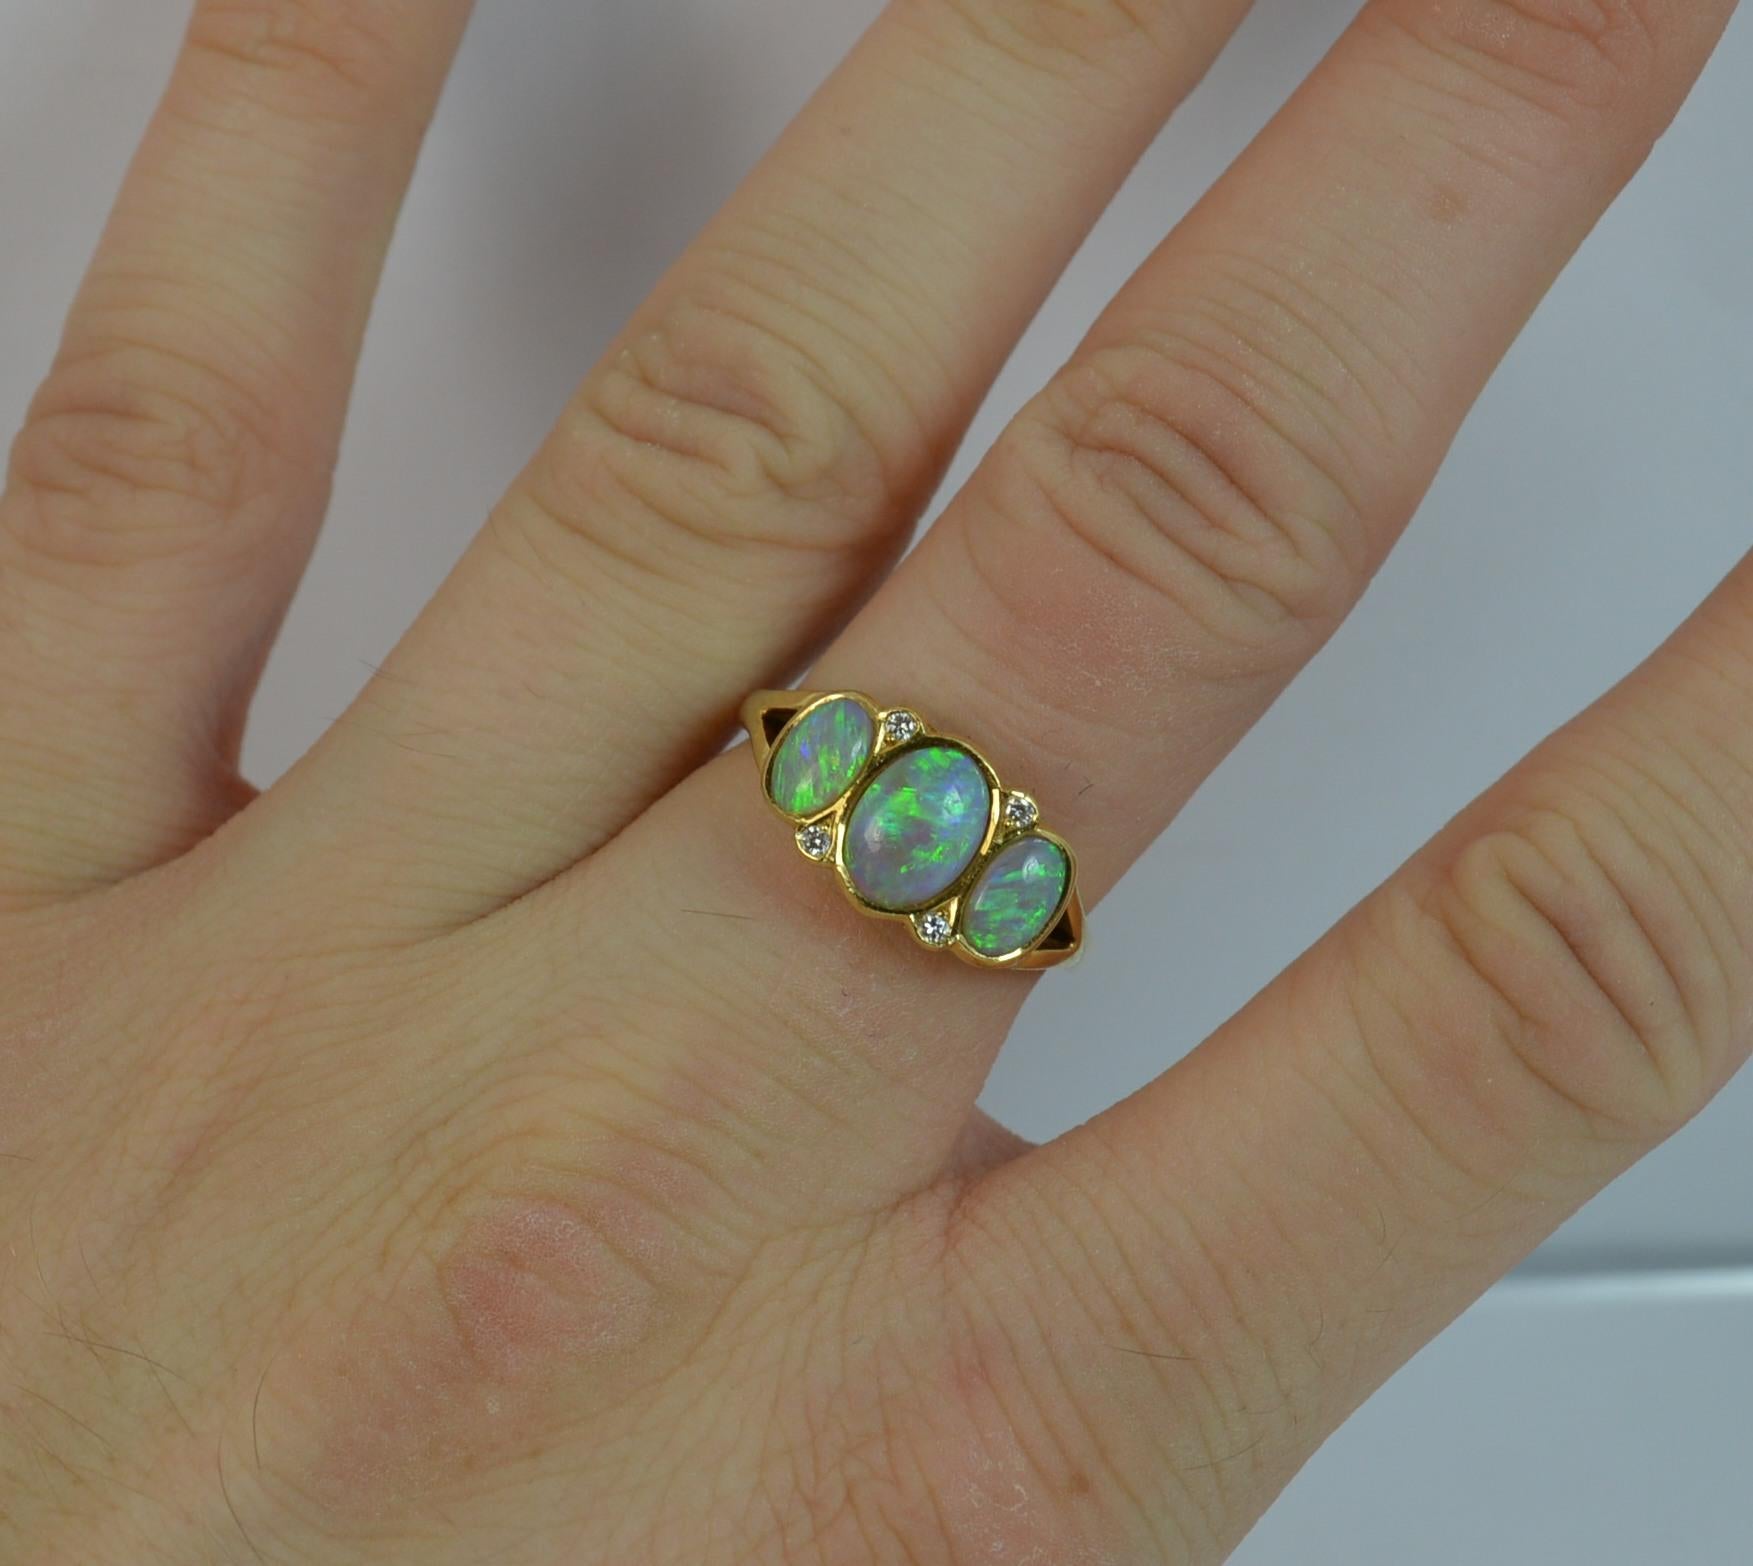 
A beautiful vintage 18 carat gold, opal and diamond ring in the Victorian design.
​
​The 18 carat yellow gold shank and setting.

Designed with three oval opals, all natural and full of colour. Pairs of VS diamond spacers in between.

15mm x 9mm